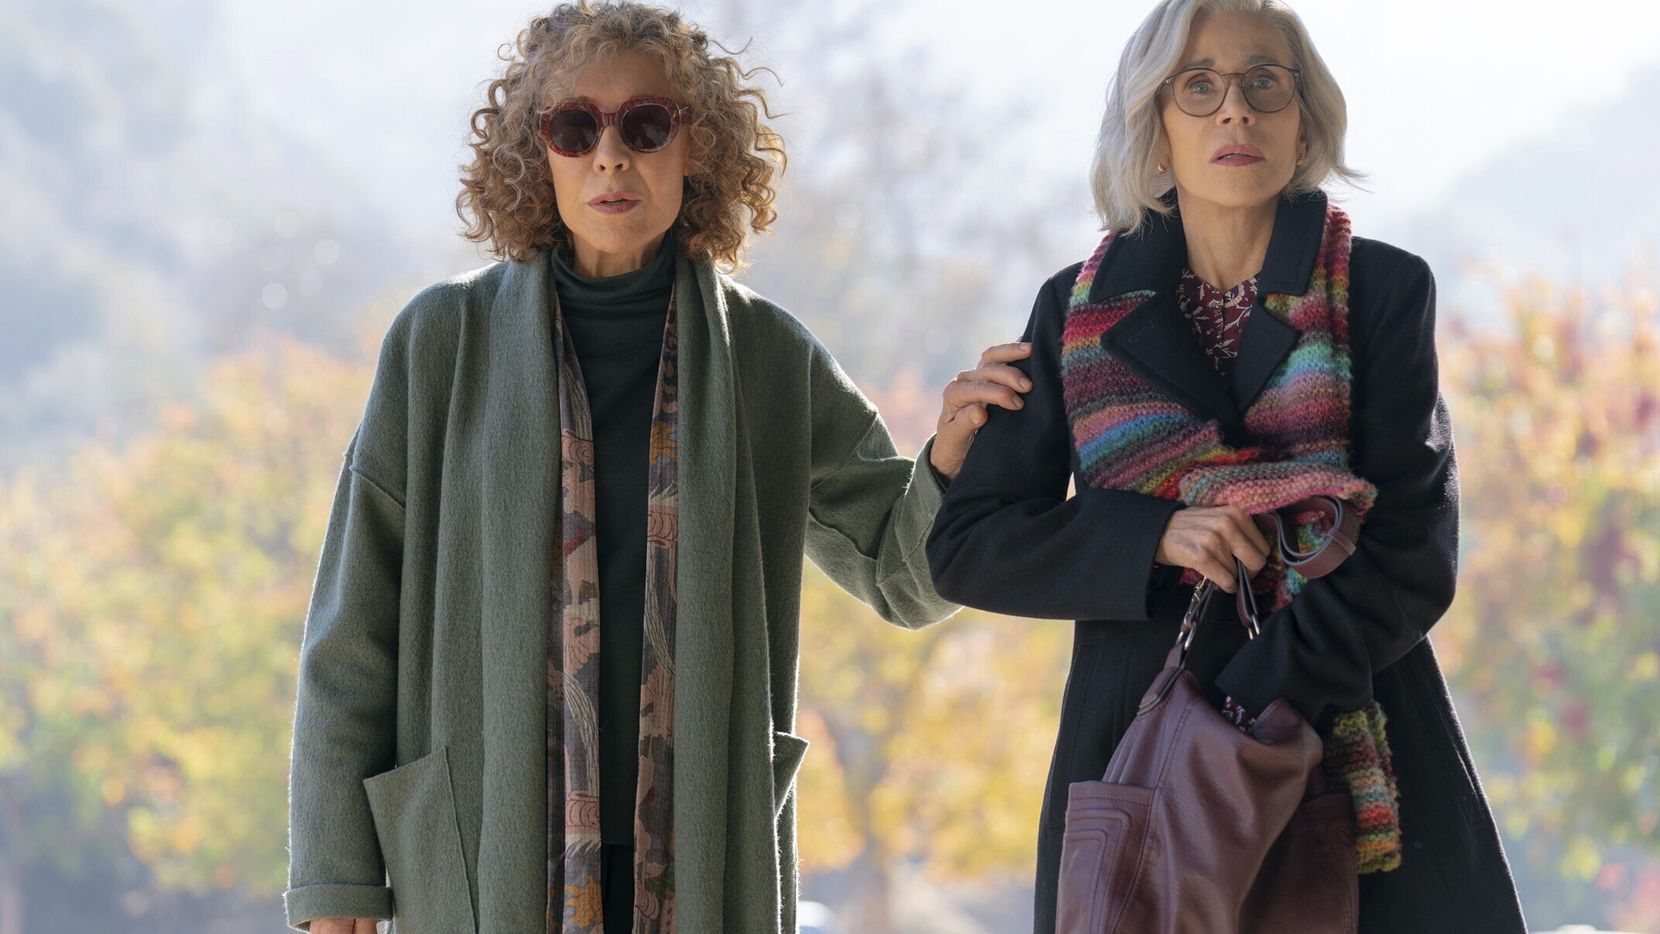 Lily Tomlin (left) and Jane Fonda play former college roommates reunited for a funeral in...